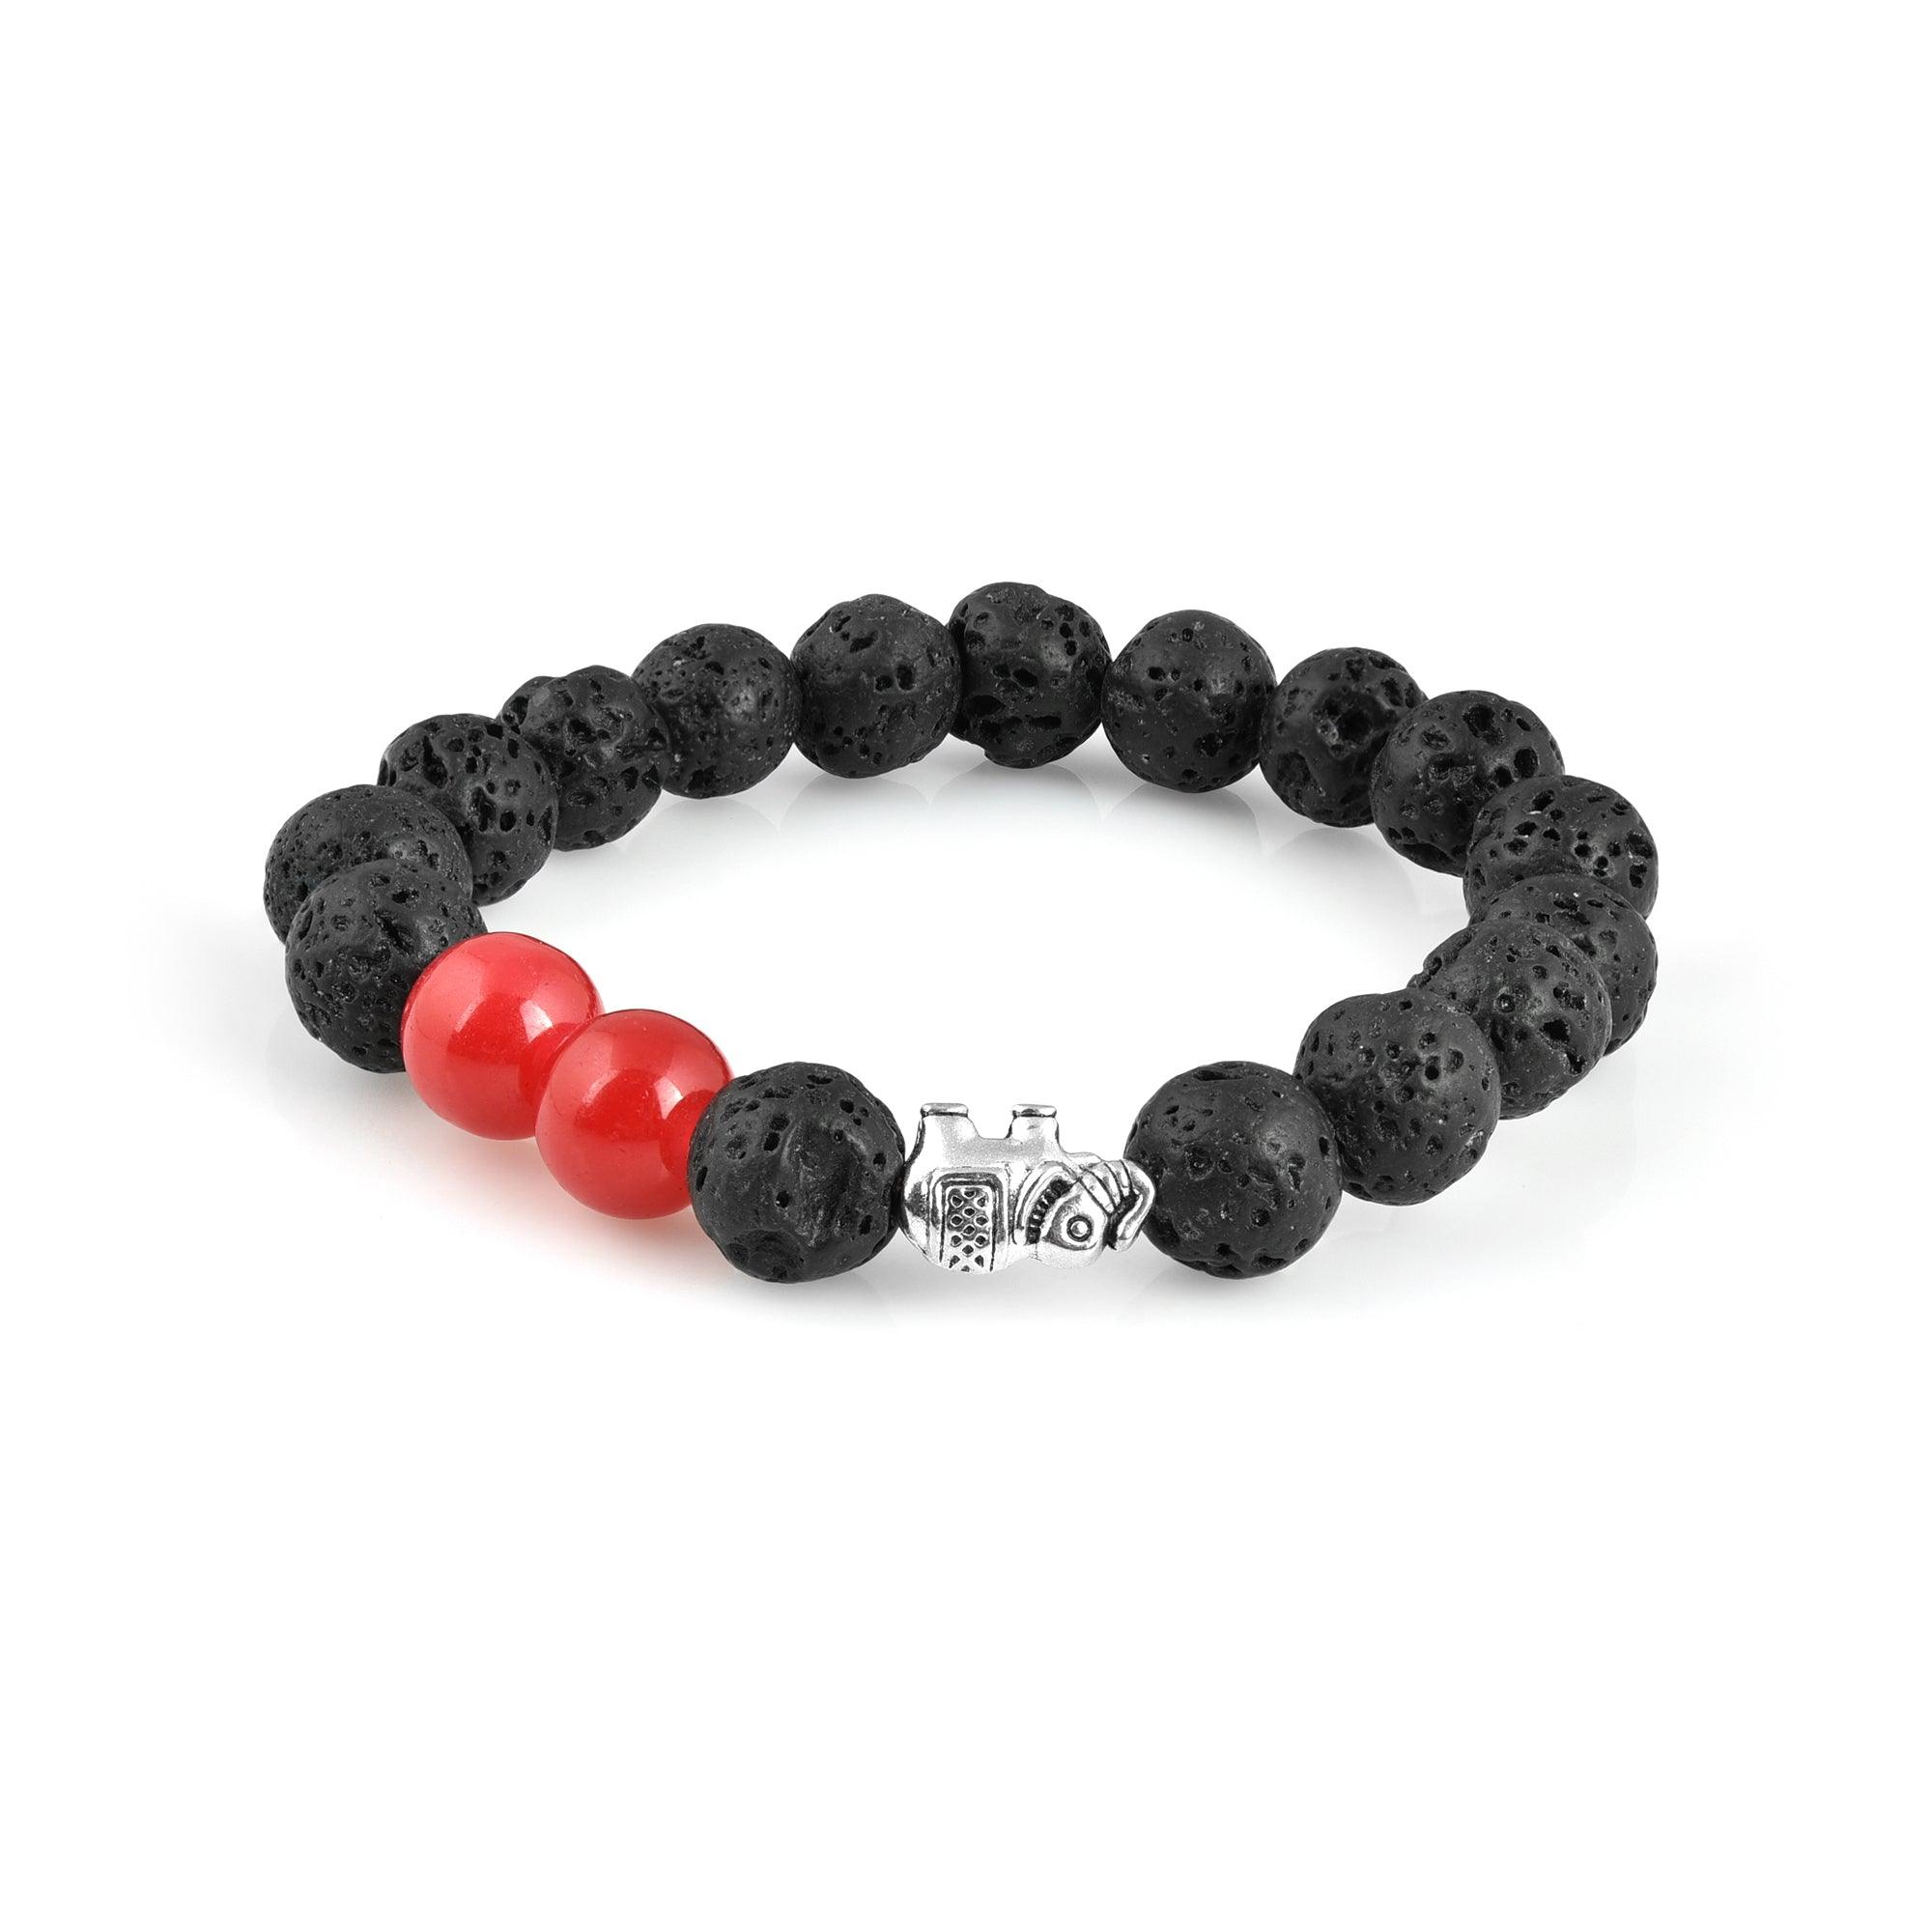 Black Lava Beads Bracelet With Red Color - The Fineworld